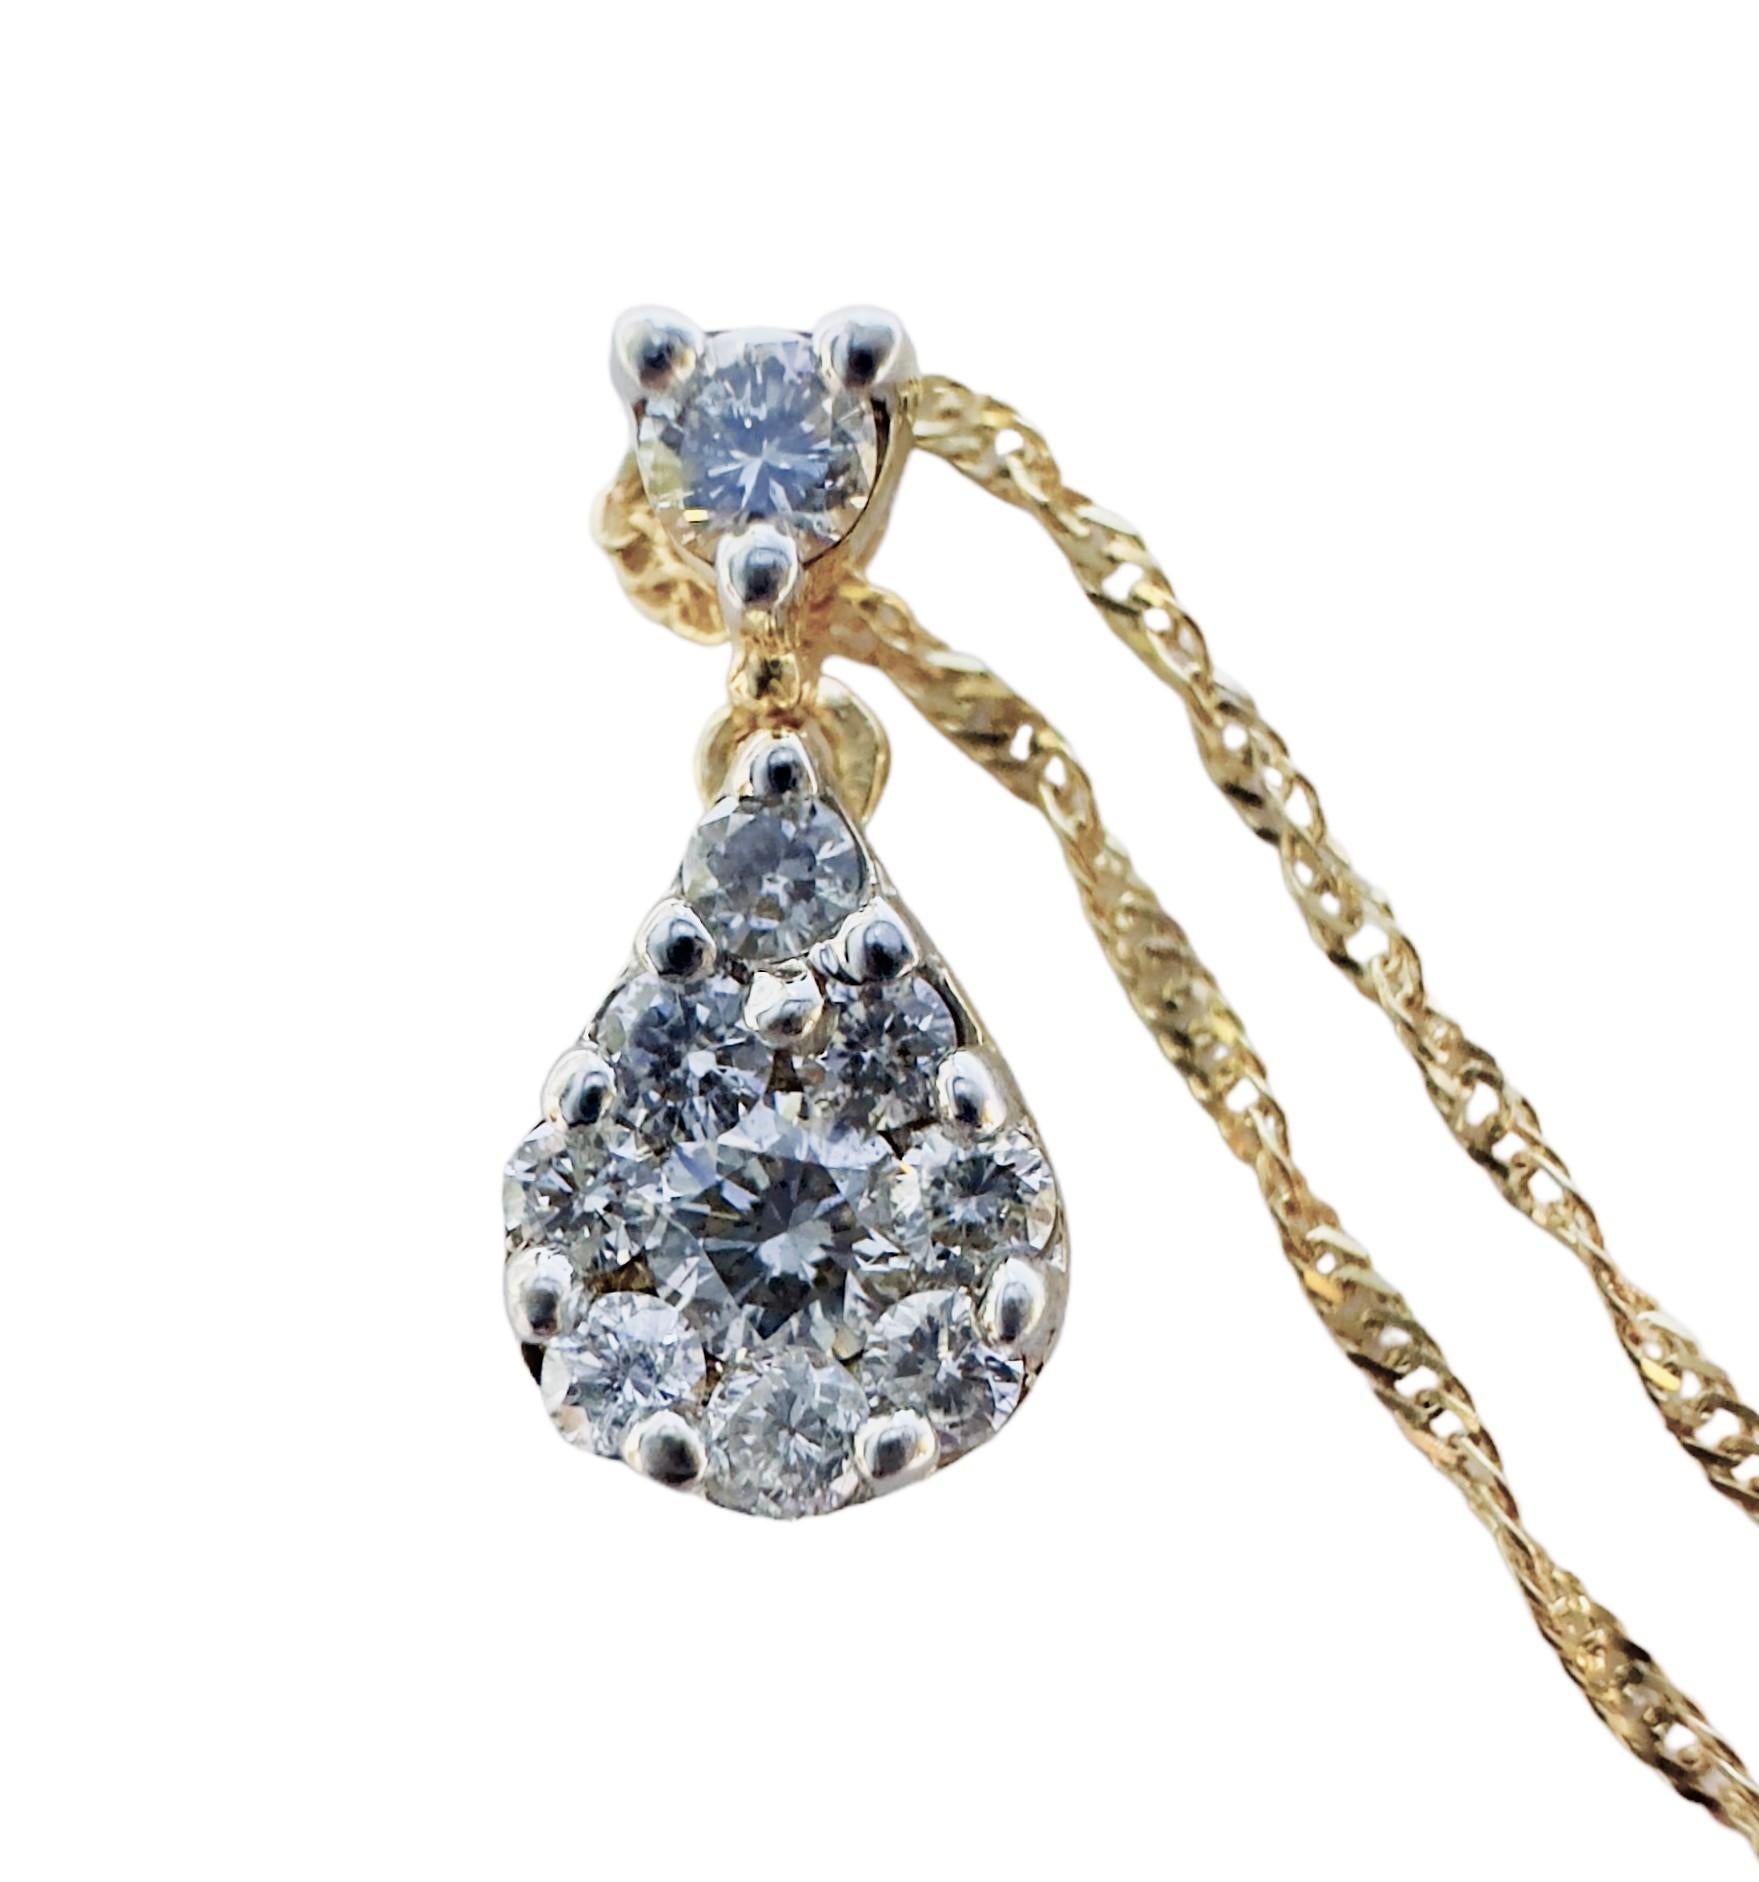 14k Yellow Gold .60 ct Diamond Cluster Pendant and 14k Gold Chain 18